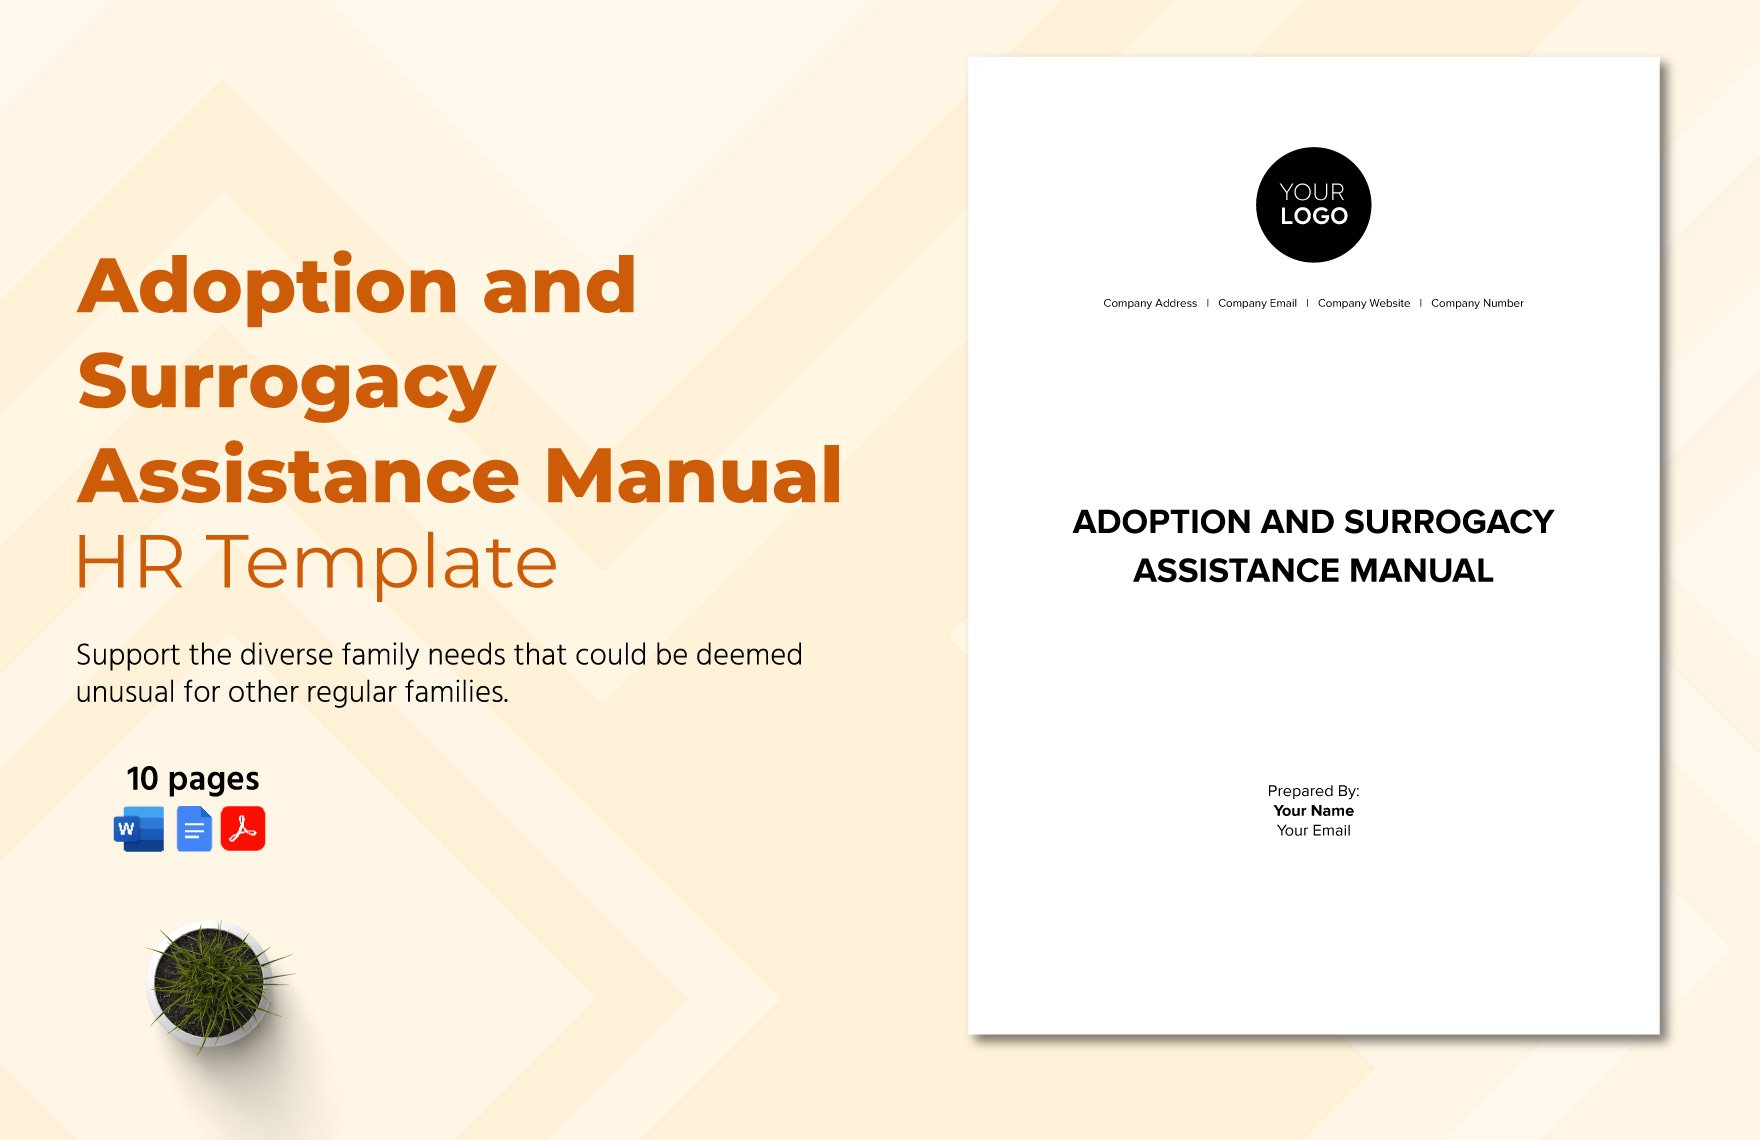 Adoption and Surrogacy Assistance Manual HR Template in Word, Google Docs, PDF